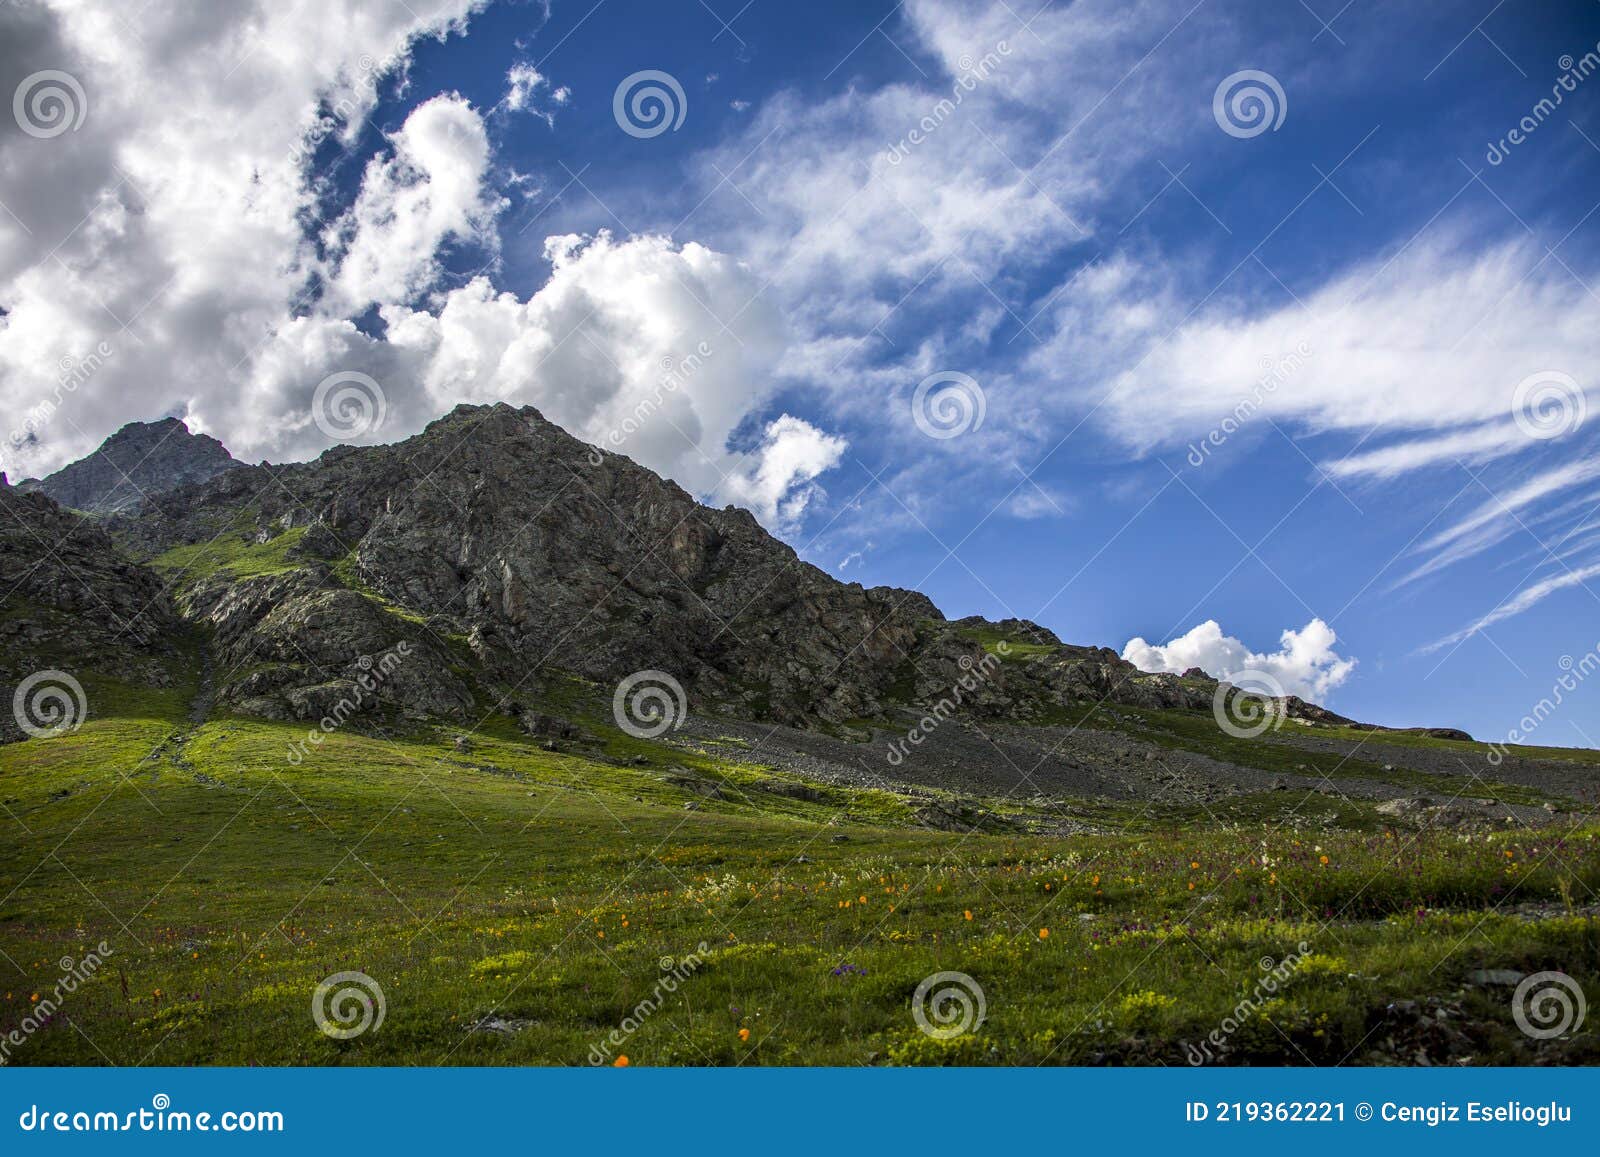 A Fascinating View of a Flowering Valley Under the Blue Sky Stock Image ...